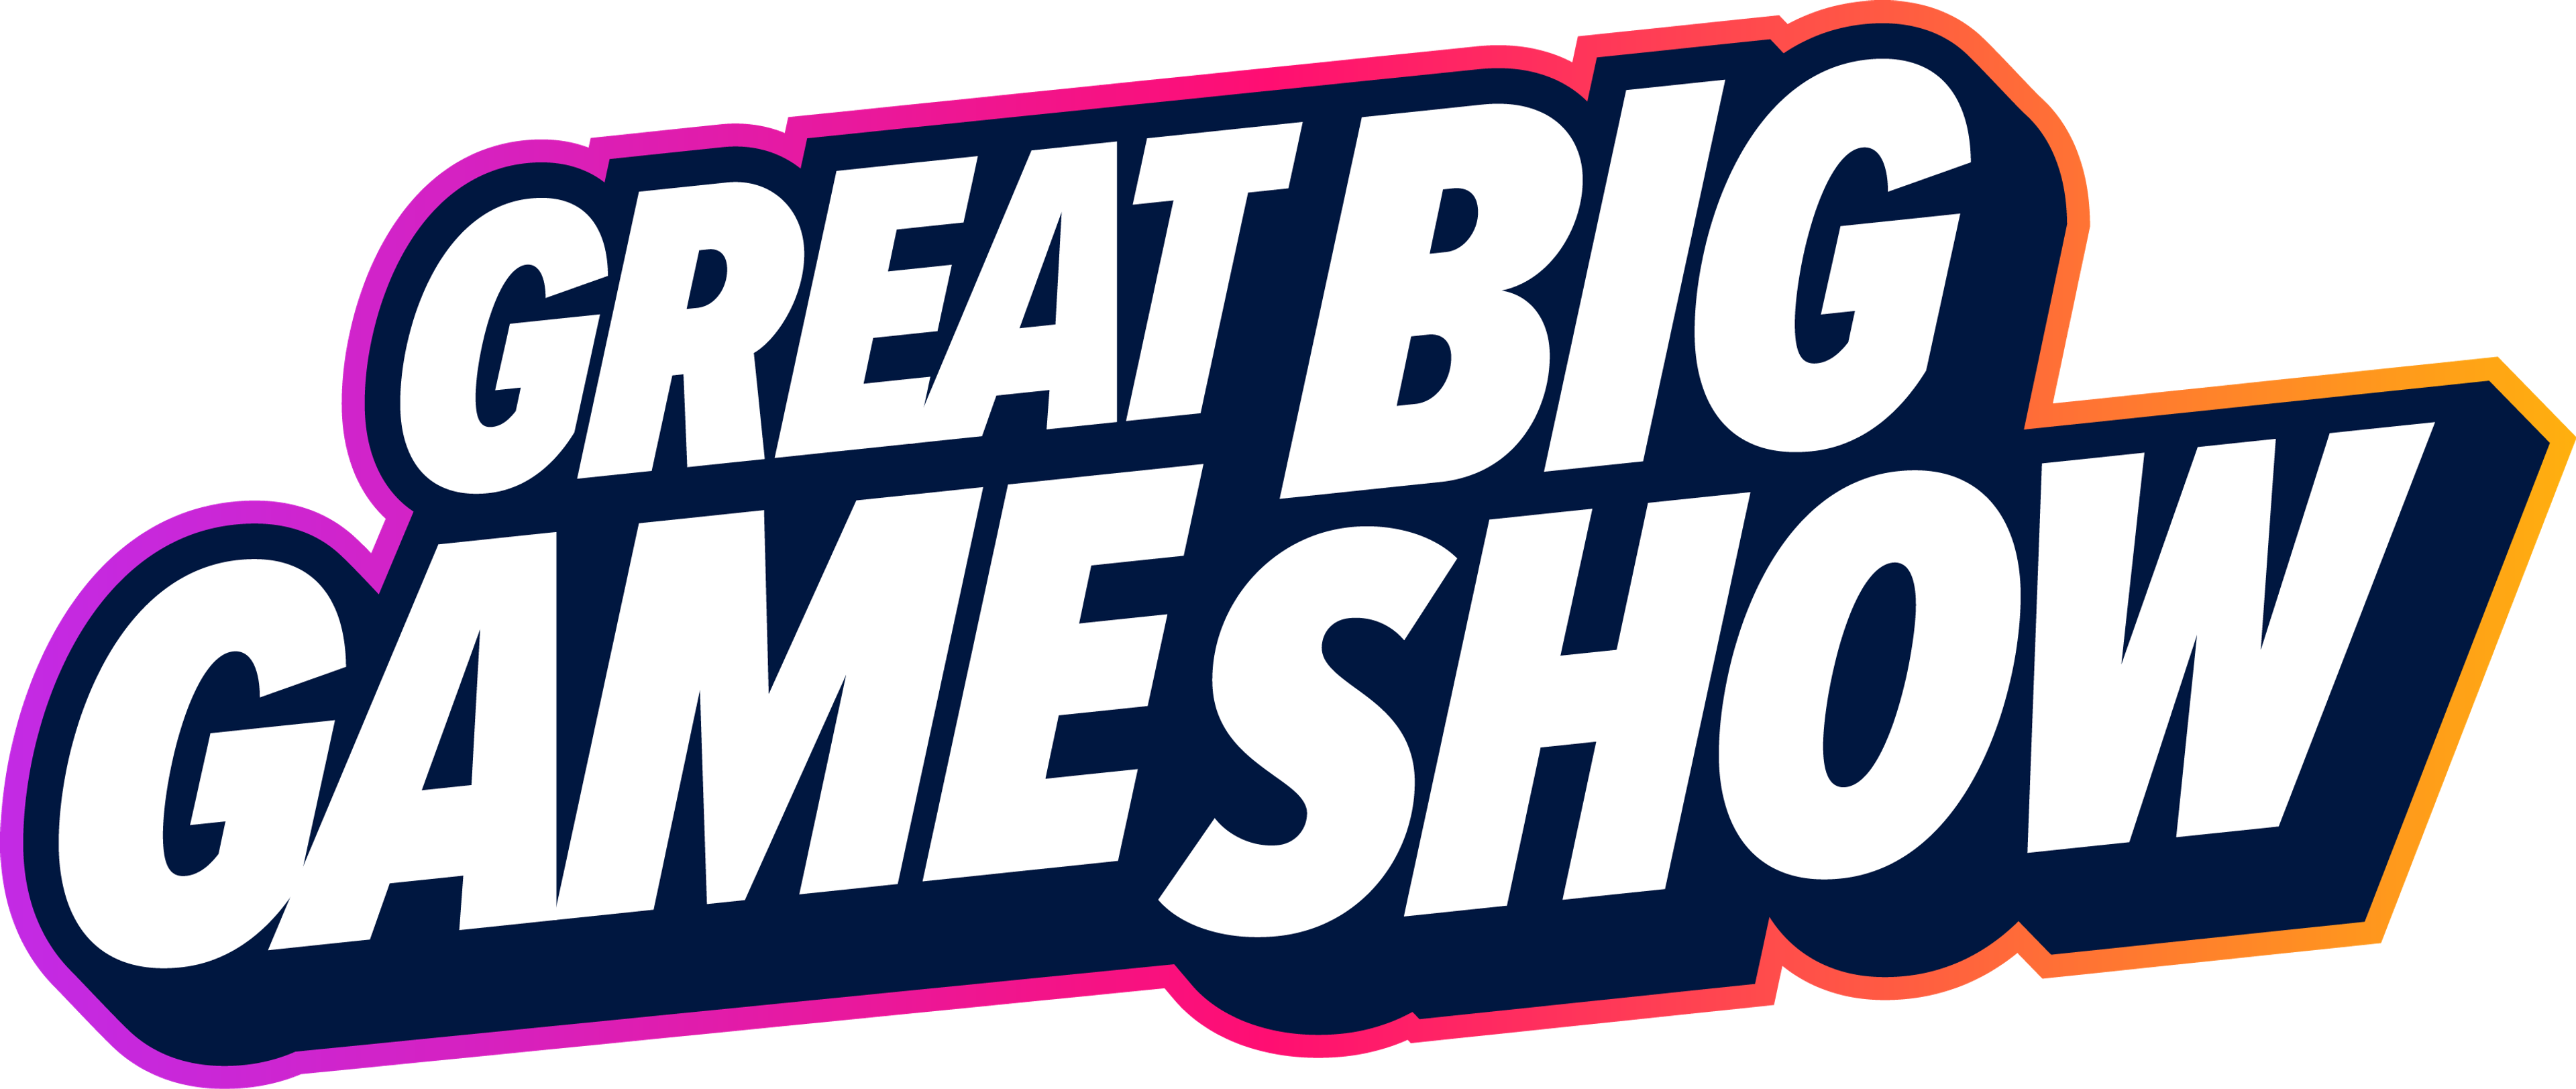 Great Big Game Show